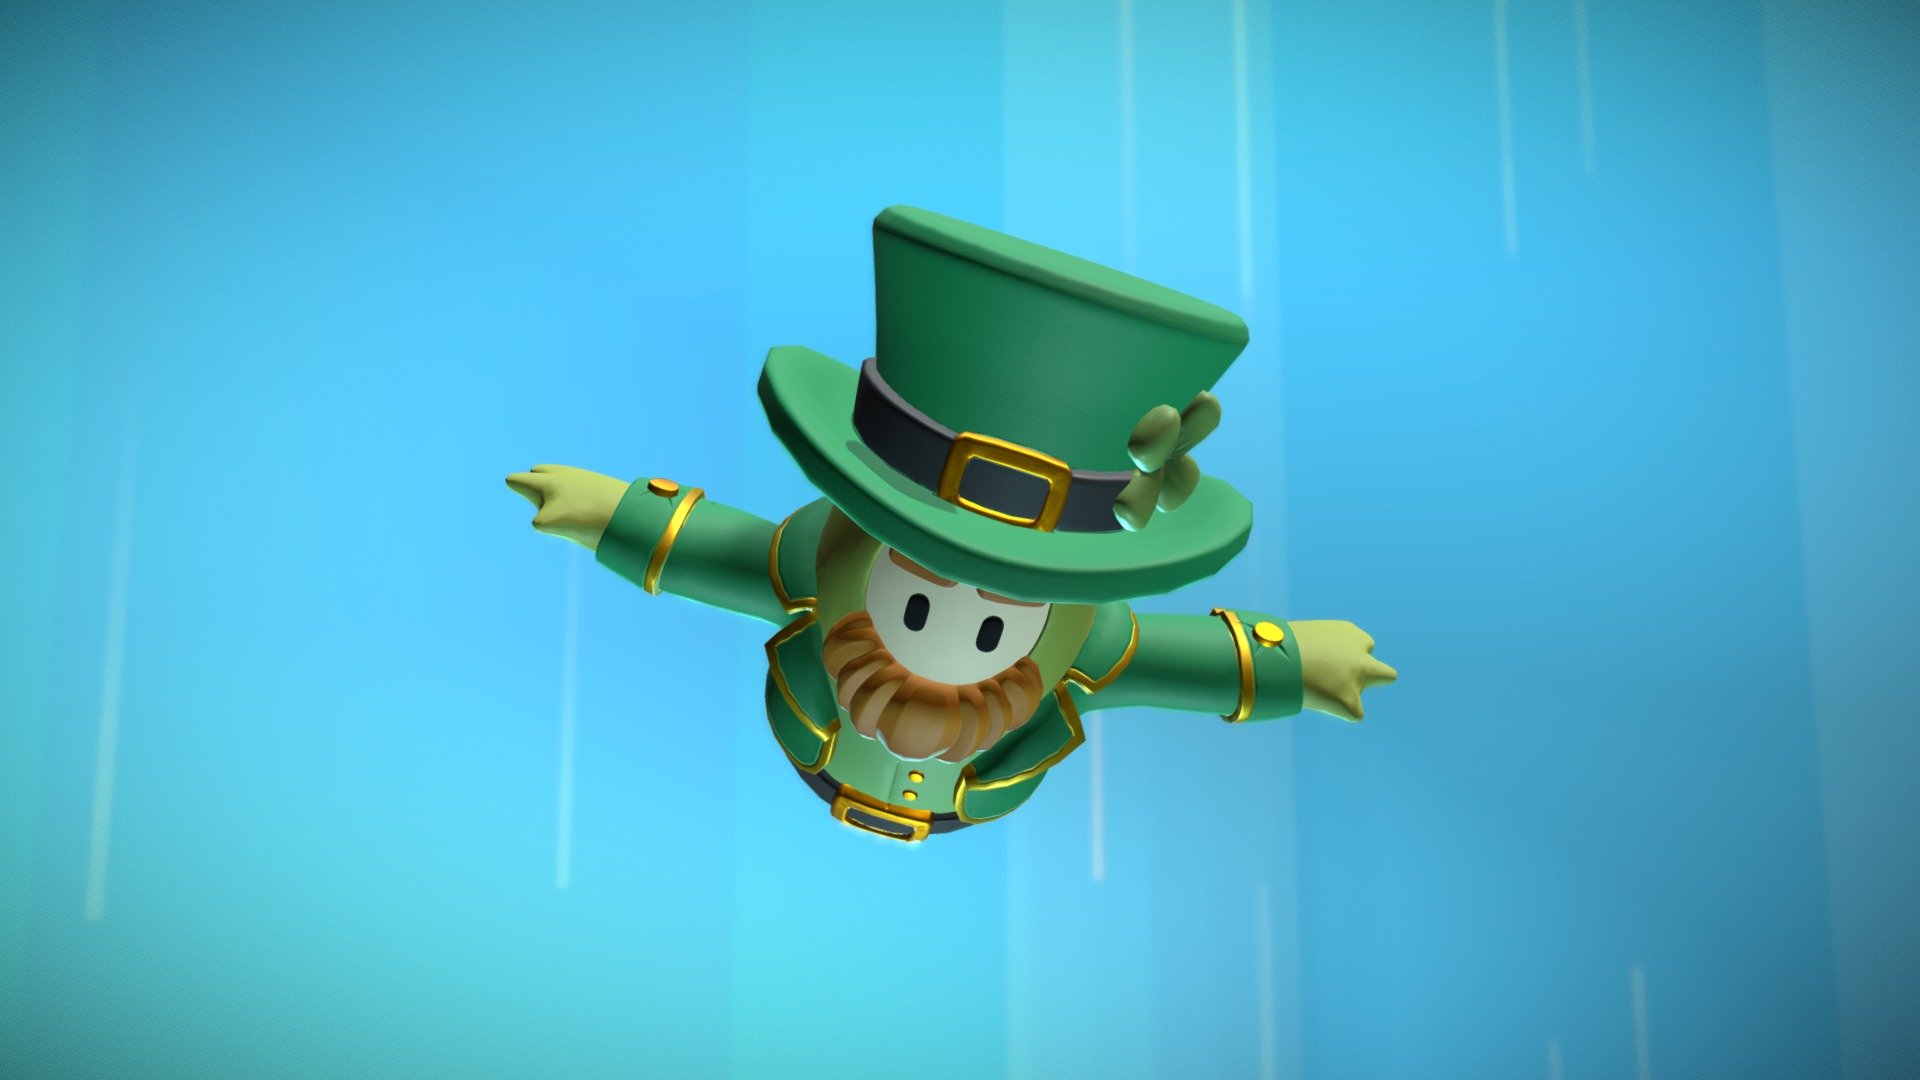 Fanart for the amazingly fun game: Fall Guys!

Sculpted in Zbrush
Retopologised / Unwrapped / Posed in Blender
Textured in Substance Painter - Fall Guys Costume - Leprechaun - Buy Royalty Free 3D model by Nikita De Ruysscher (@Nikita_De_Ruysscher) 3d model